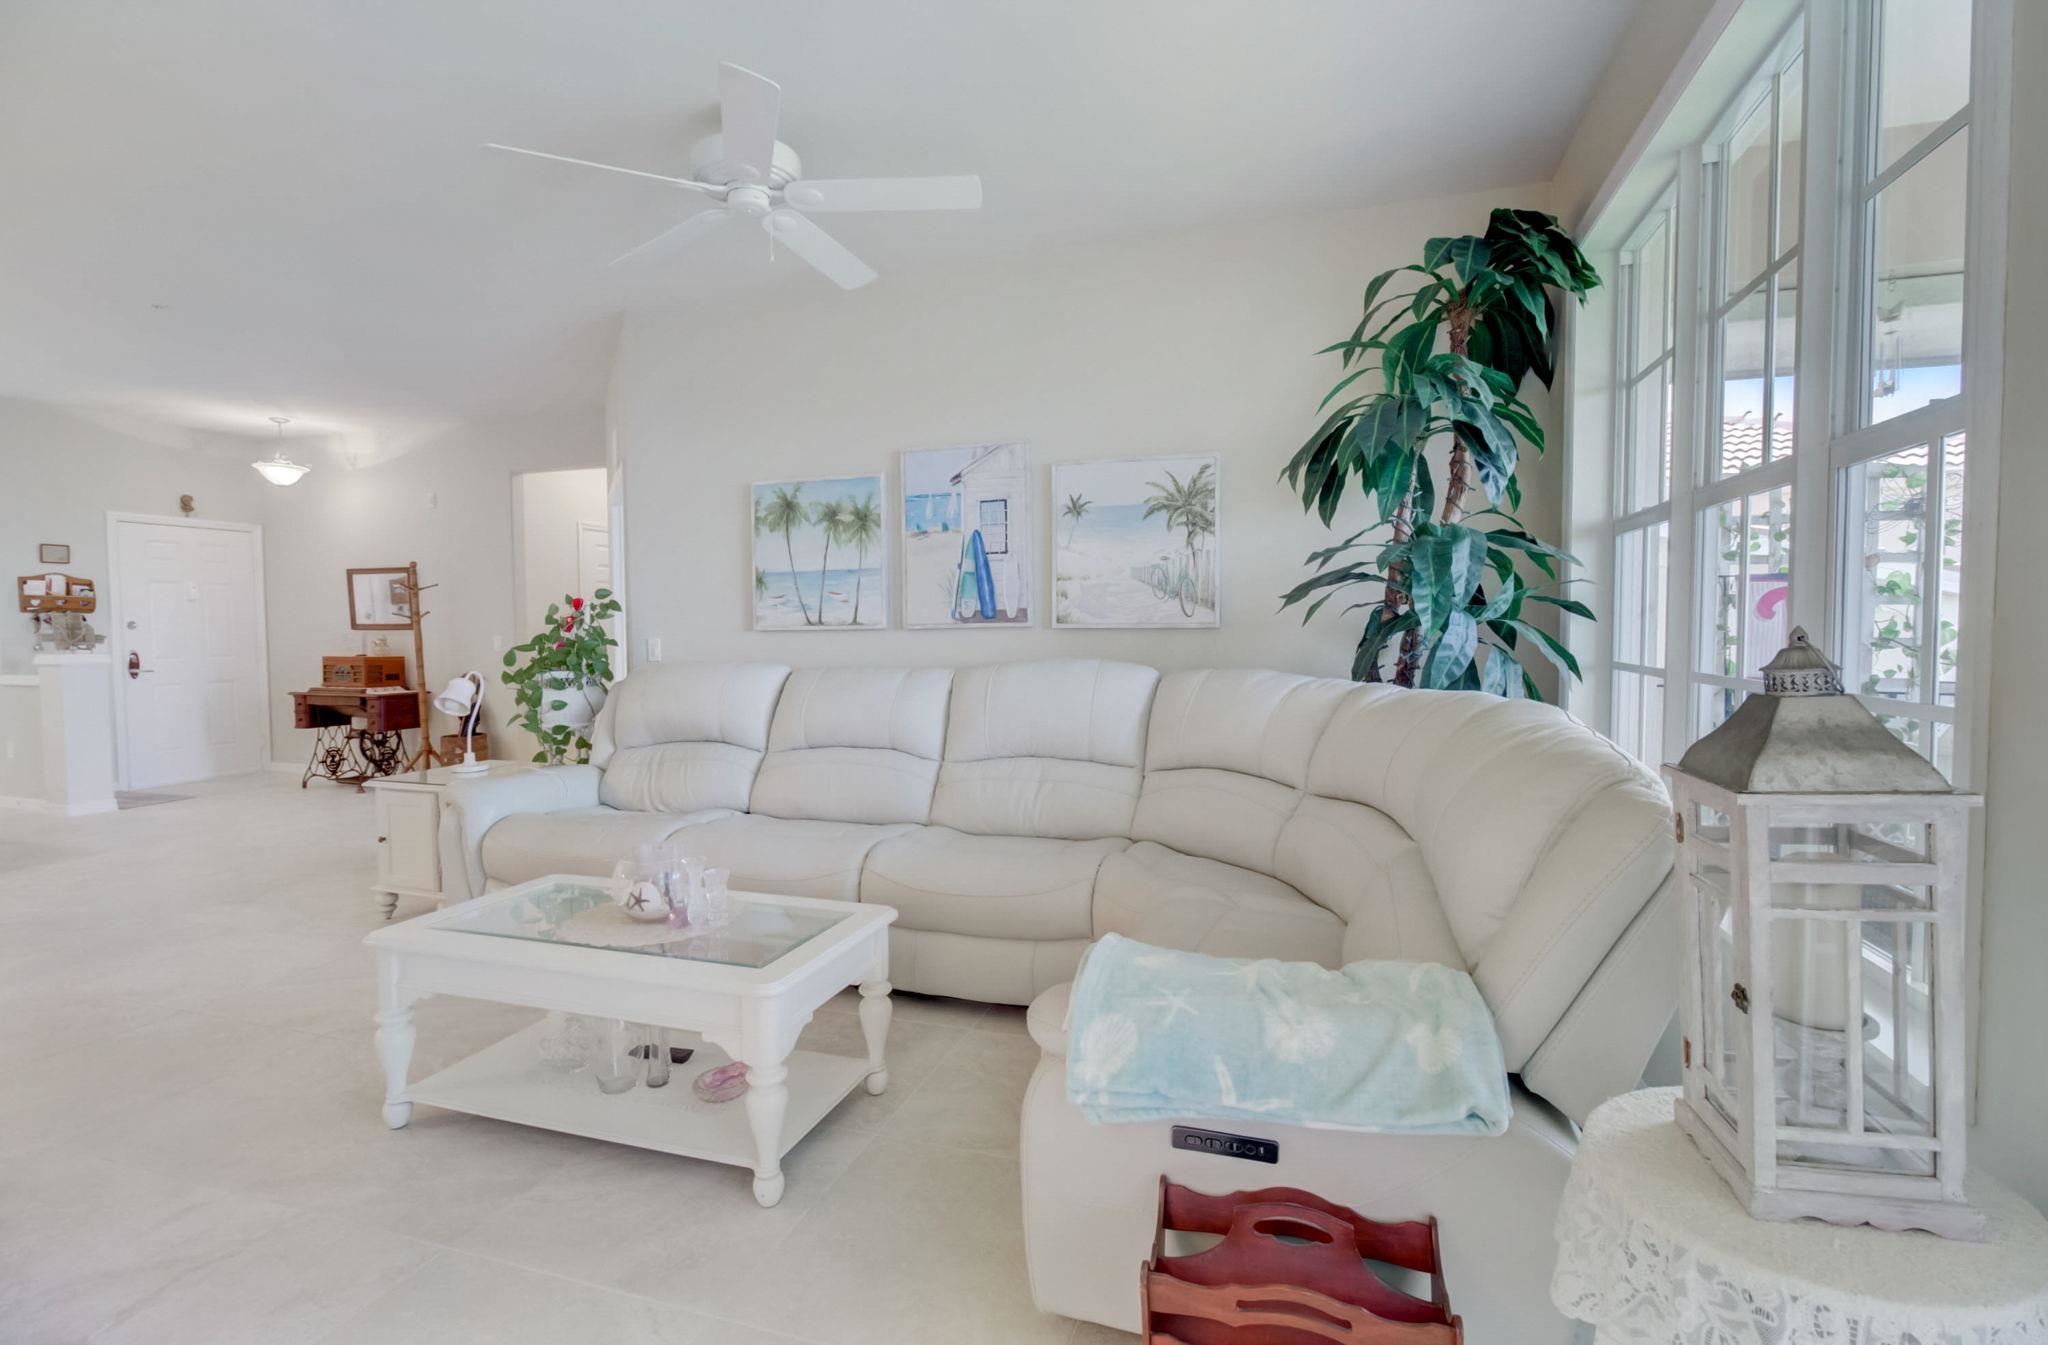 11741 Pasetto Ln, Fort Myers, Florida 33908, 2 Bedrooms Bedrooms, ,2 BathroomsBathrooms,Condo,For Sale,Pasetto Ln,2240368